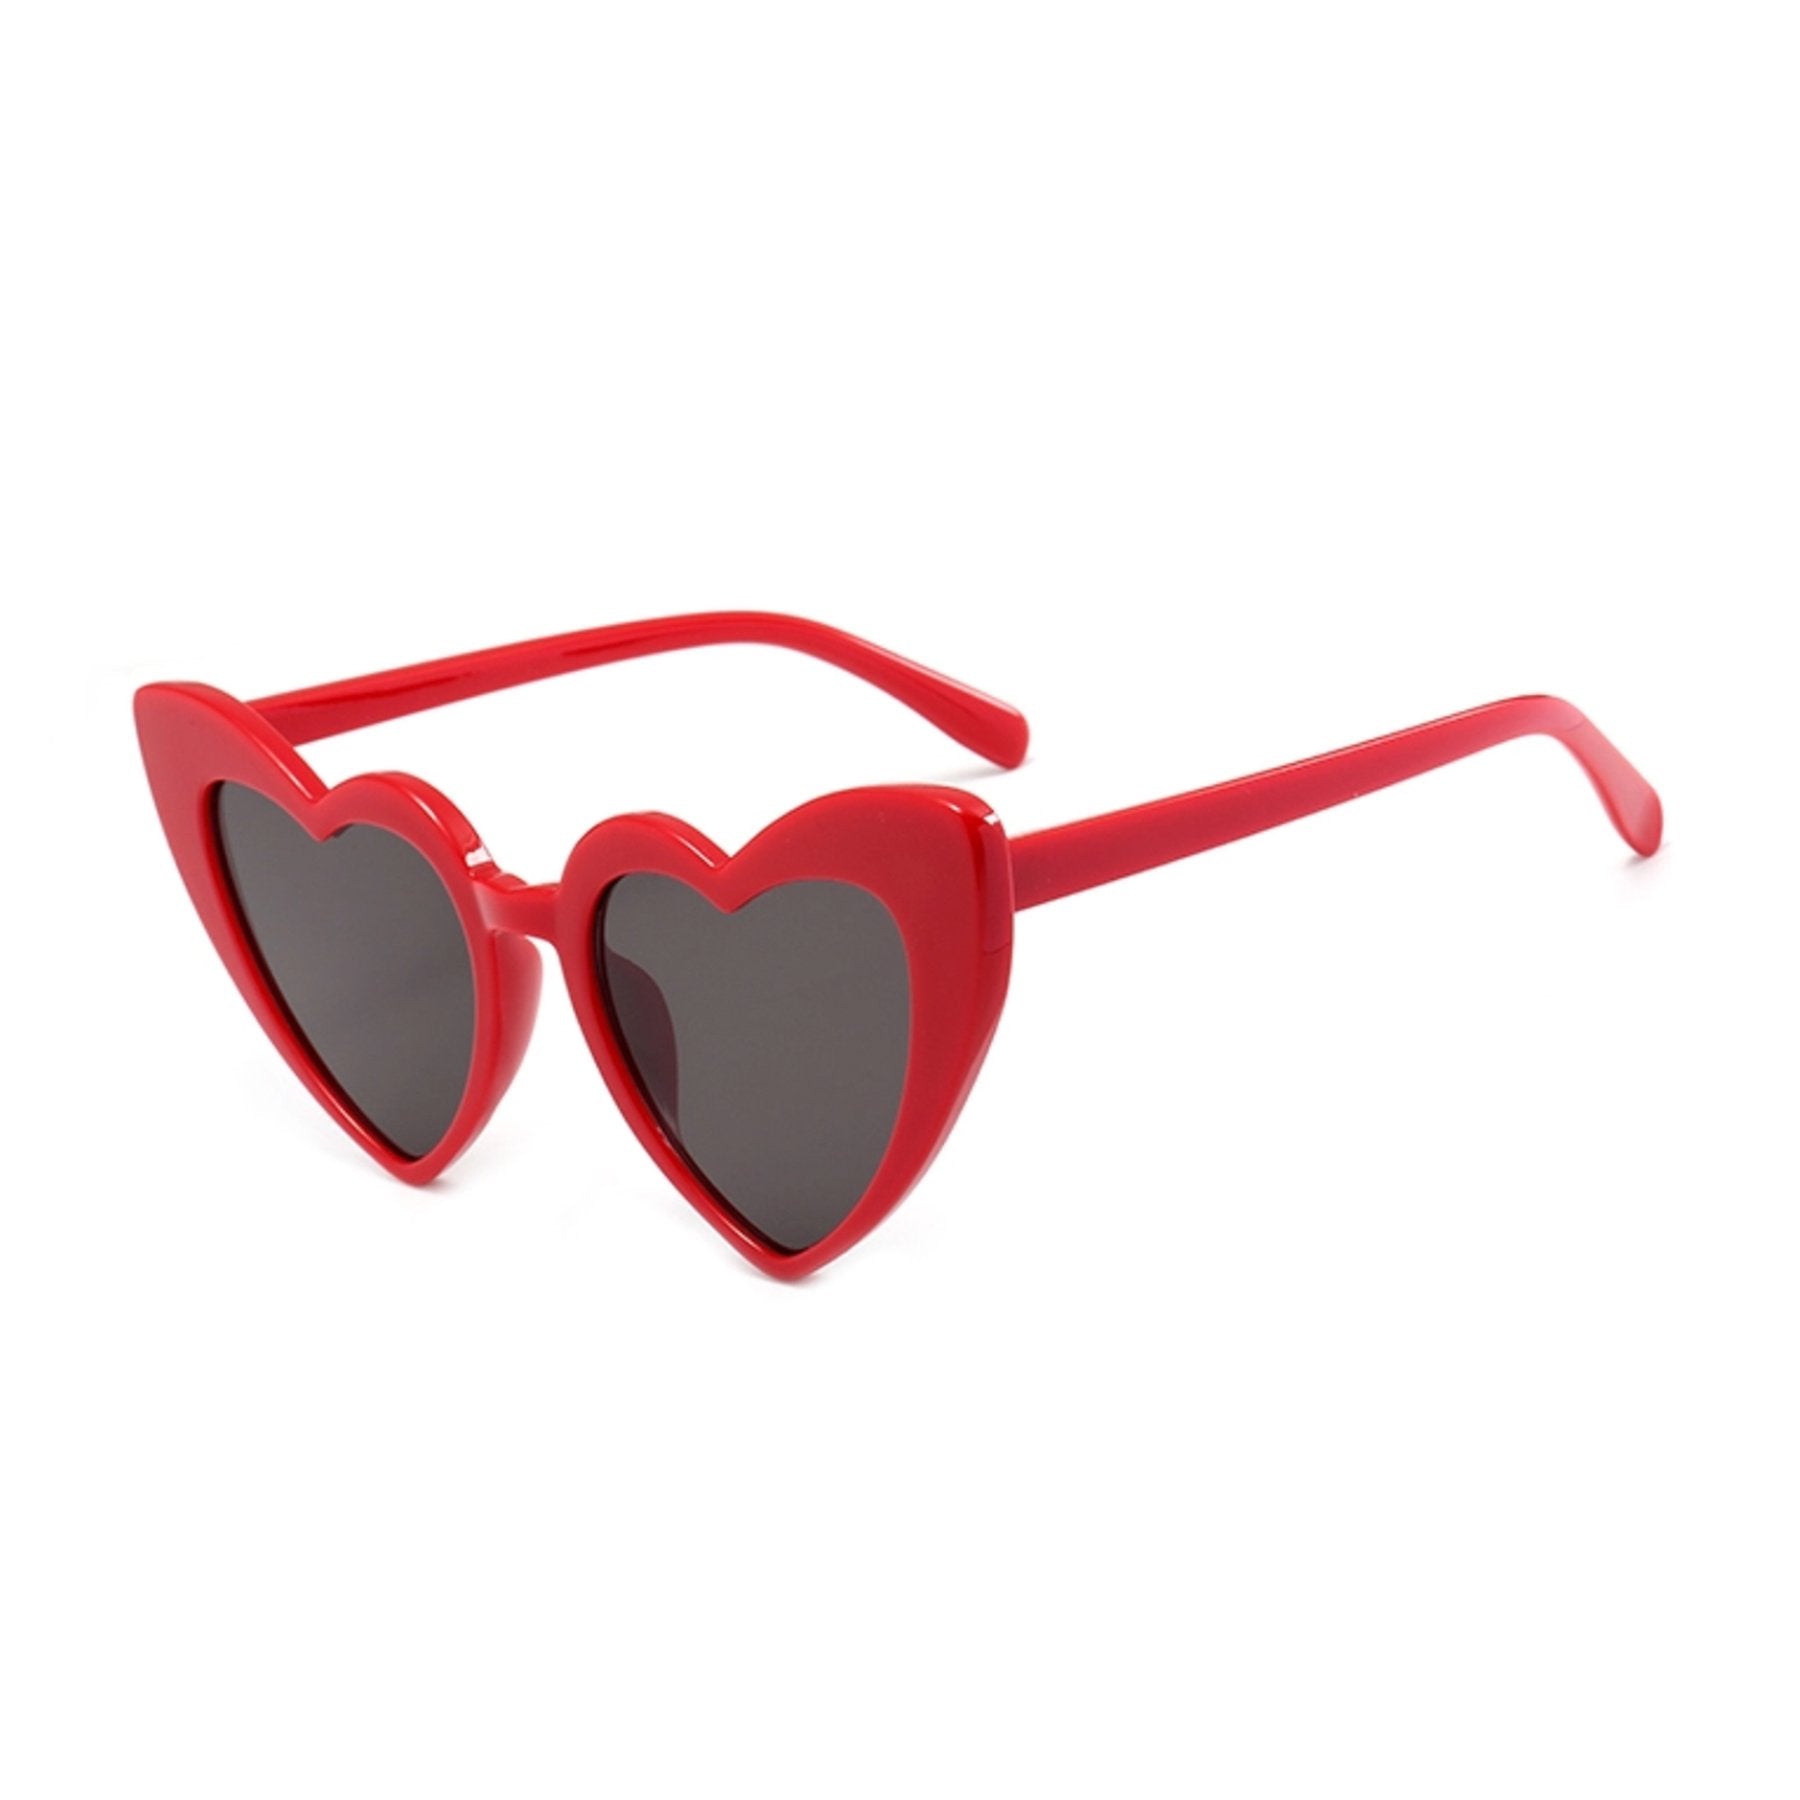 Heart sunglasses in red by Birdy Grey, side view